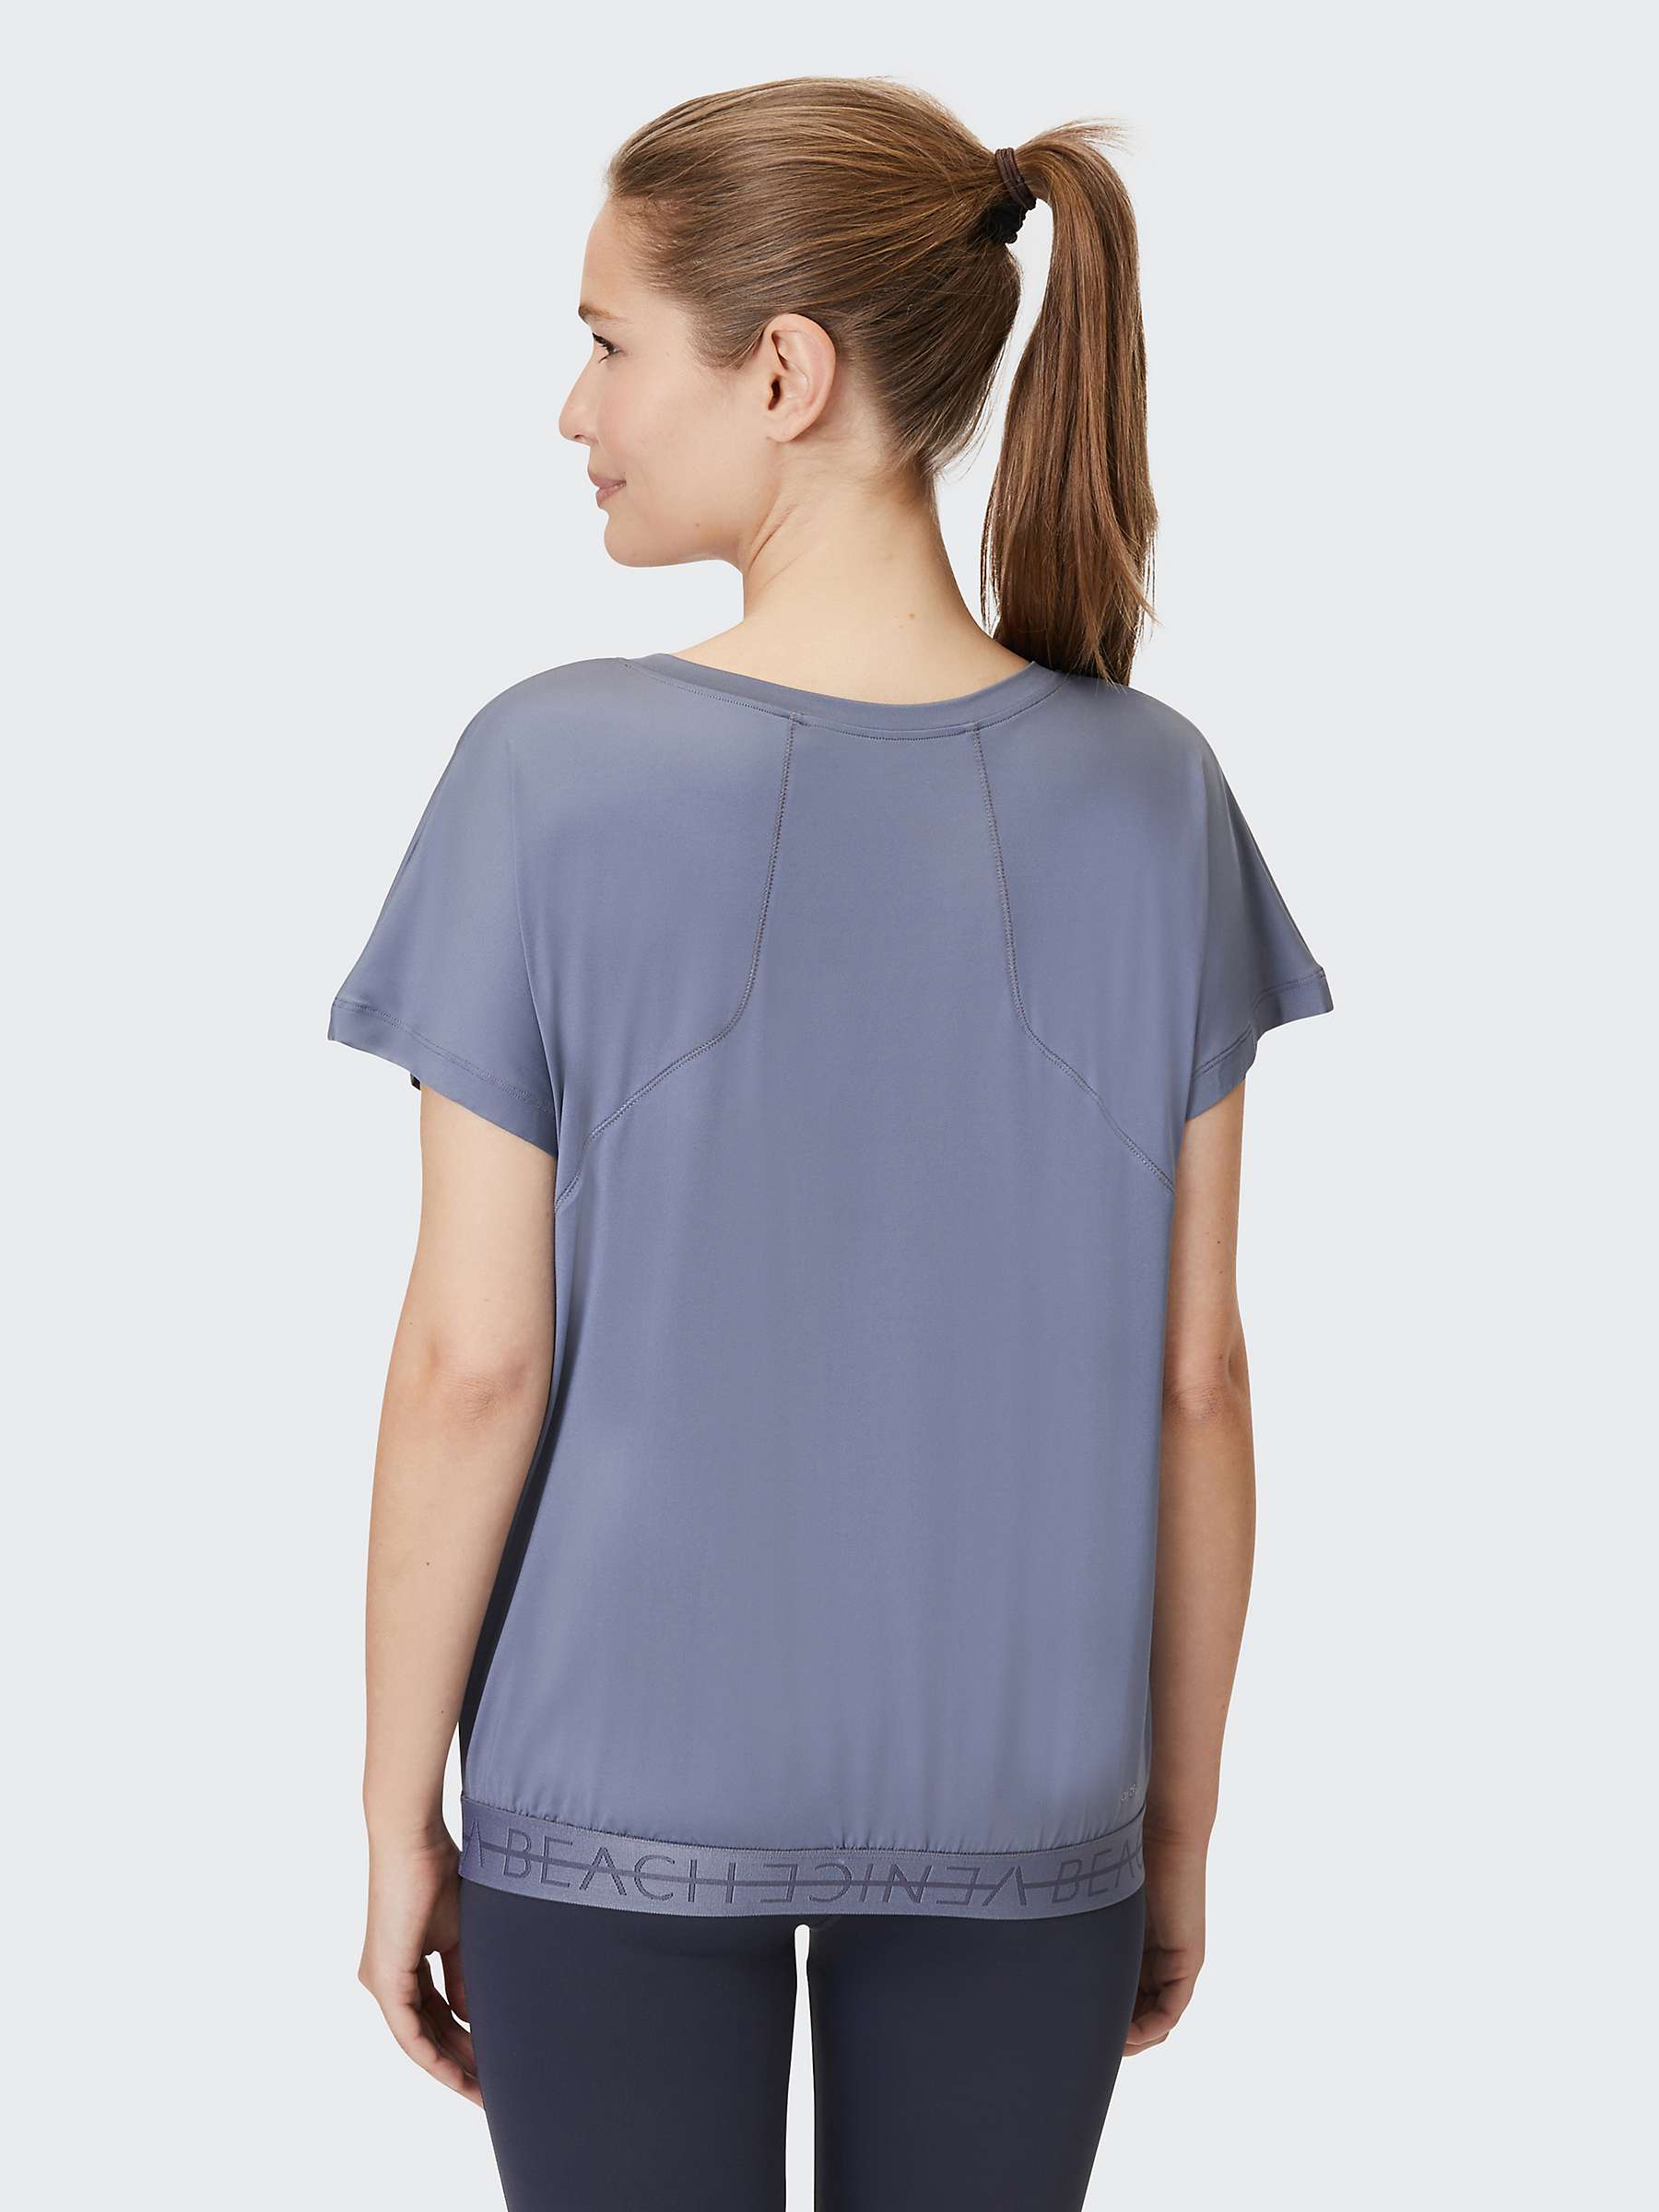 Buy Venice Beach Melodie V-Neck Training T-Shirt, Mirage Grey Online at johnlewis.com